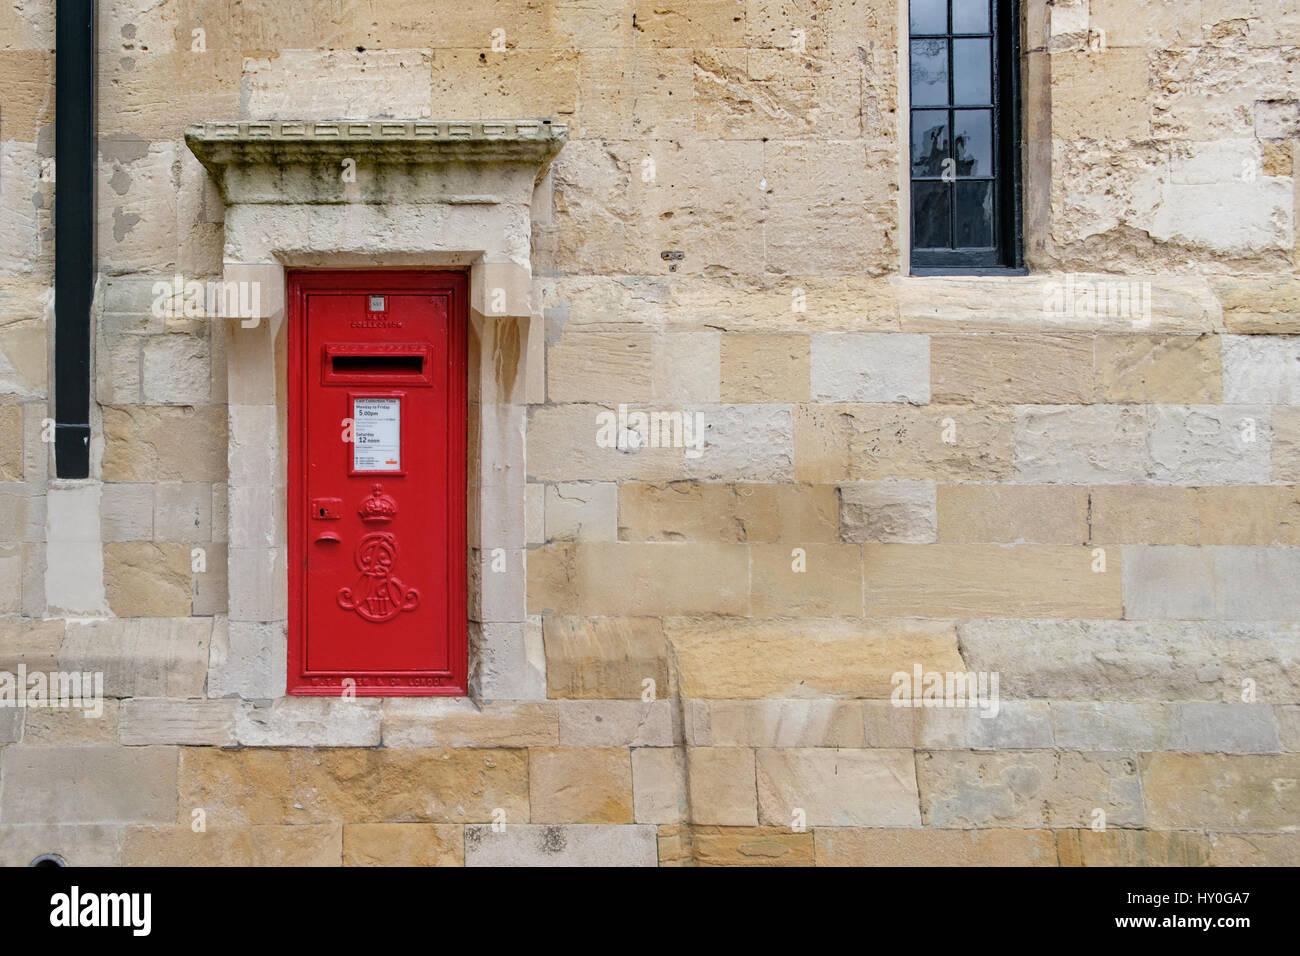 WINDSOR, UK - MARCH 18: A traditional iconic British post box in a stone wall in March 2017. Stock Photo